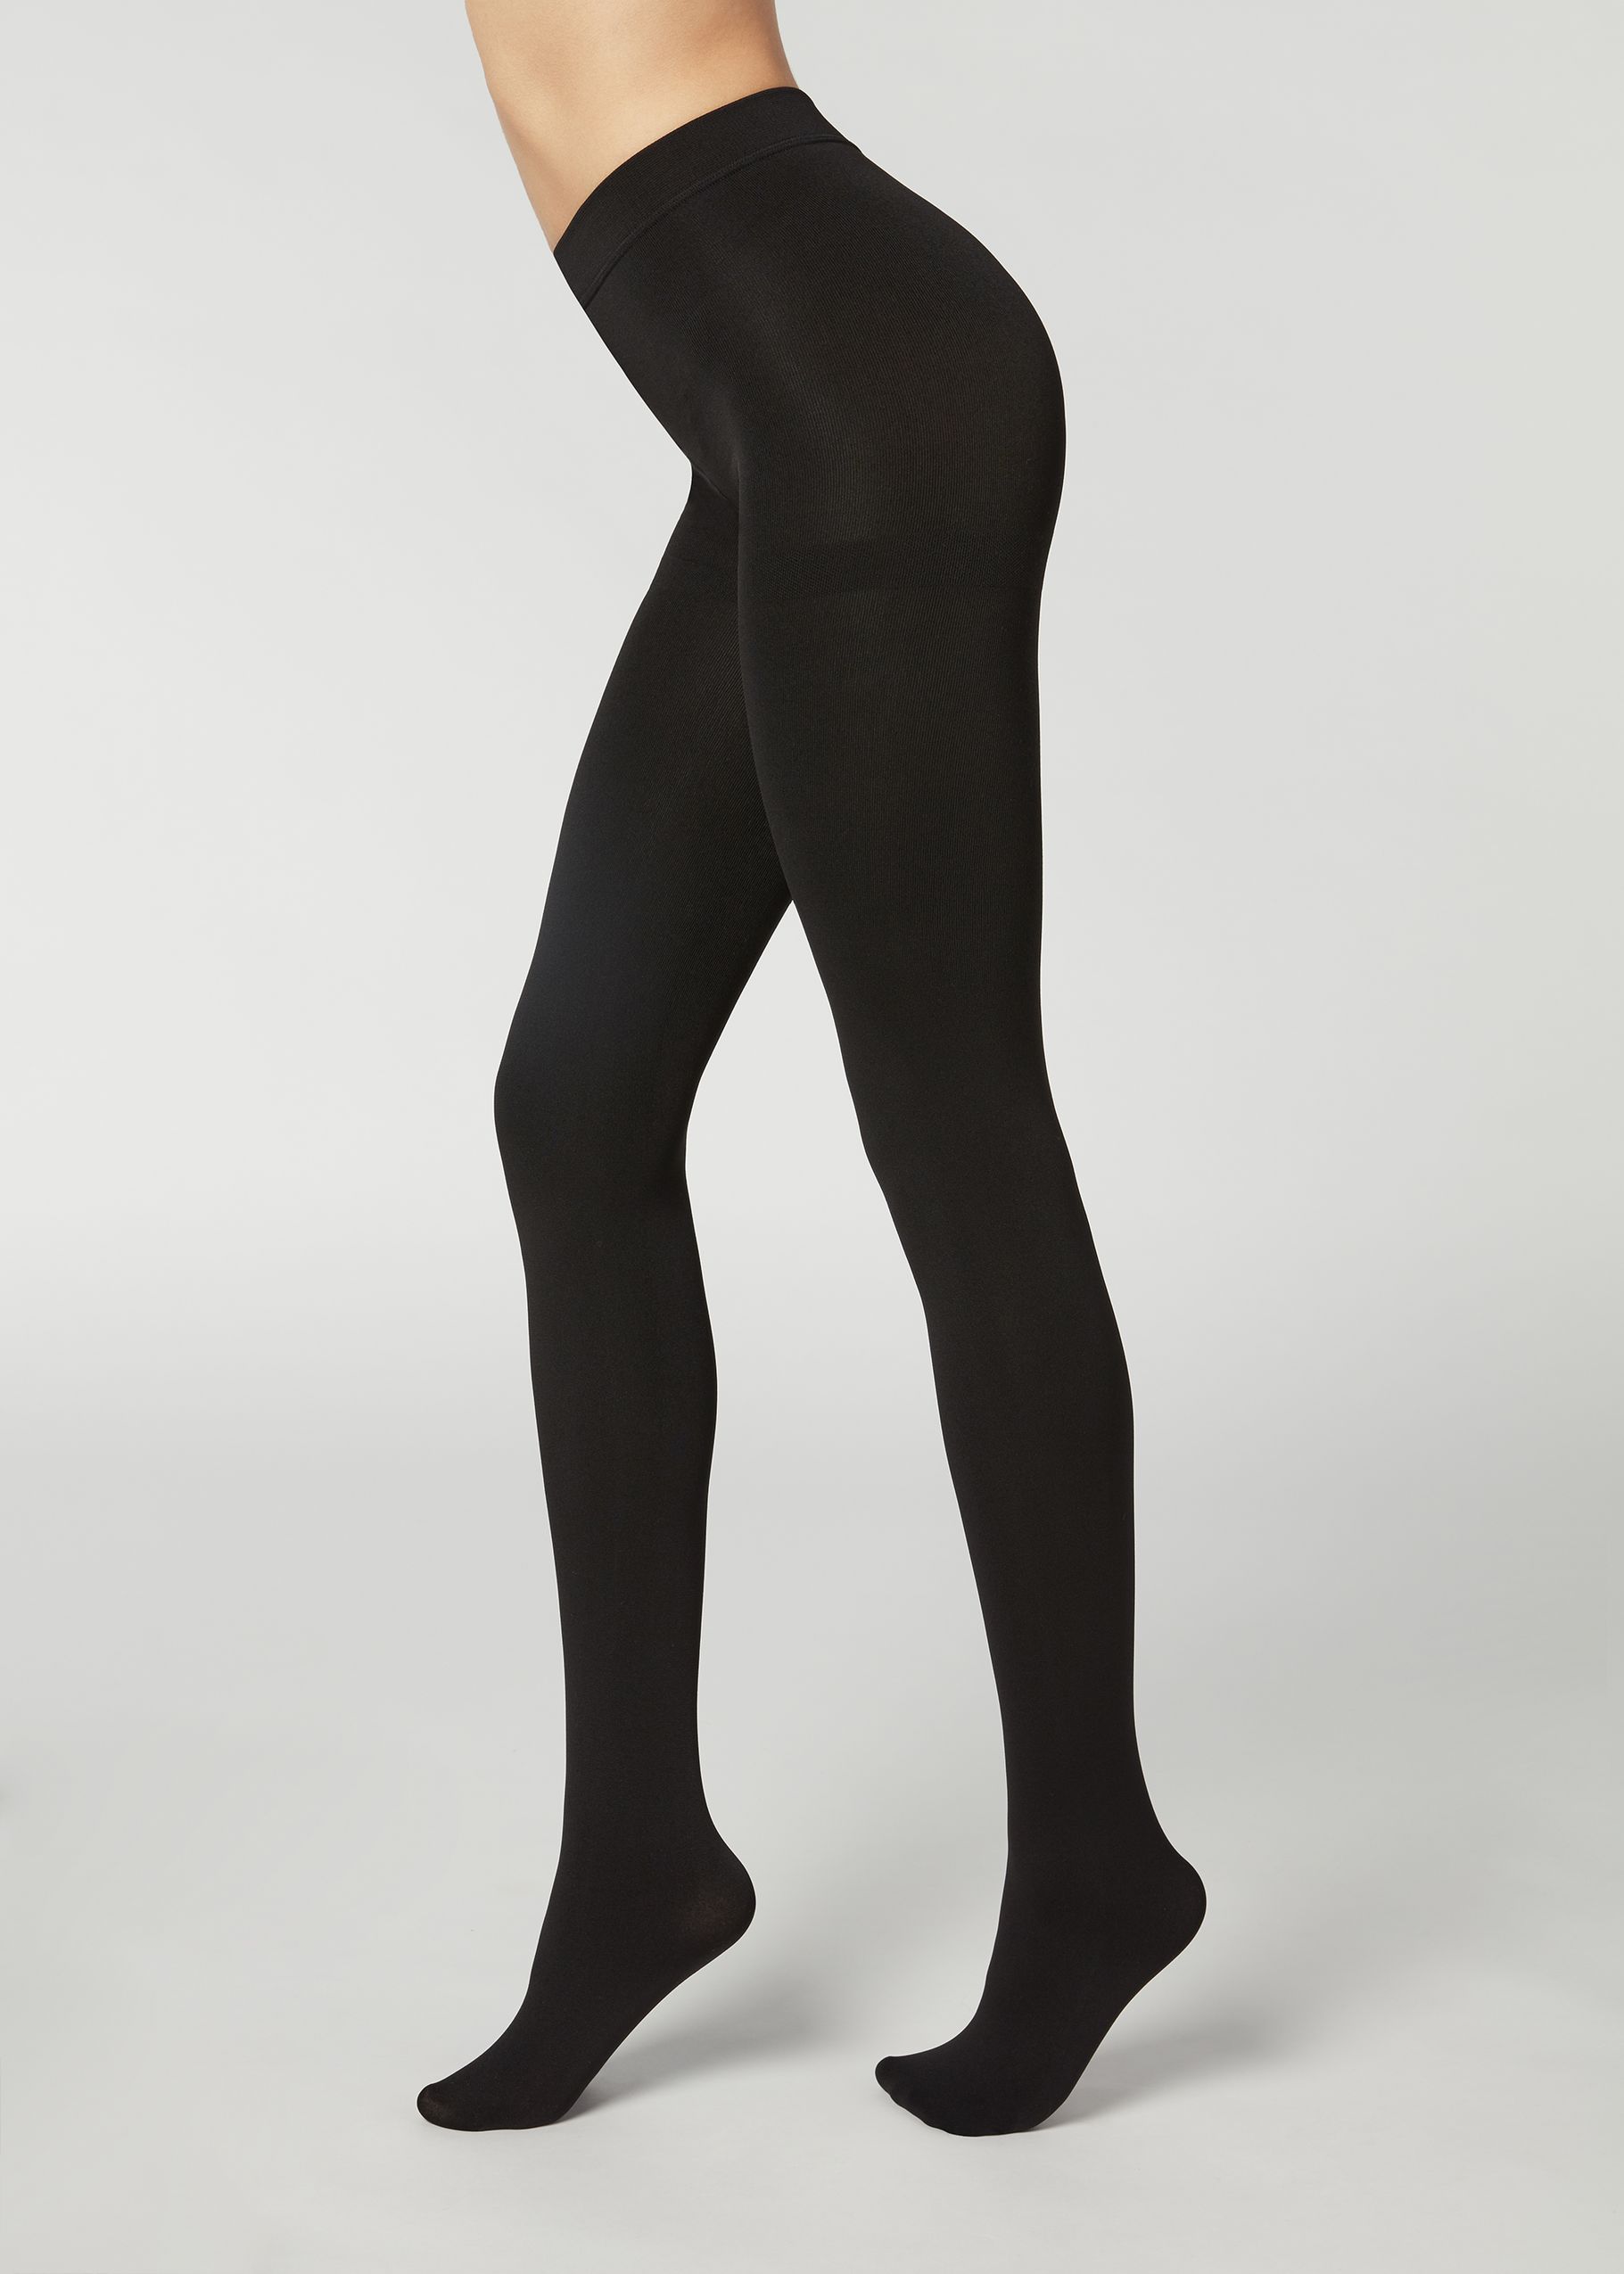 Thermal Super Opaque Tights - Calzedonia | Calzedonia US